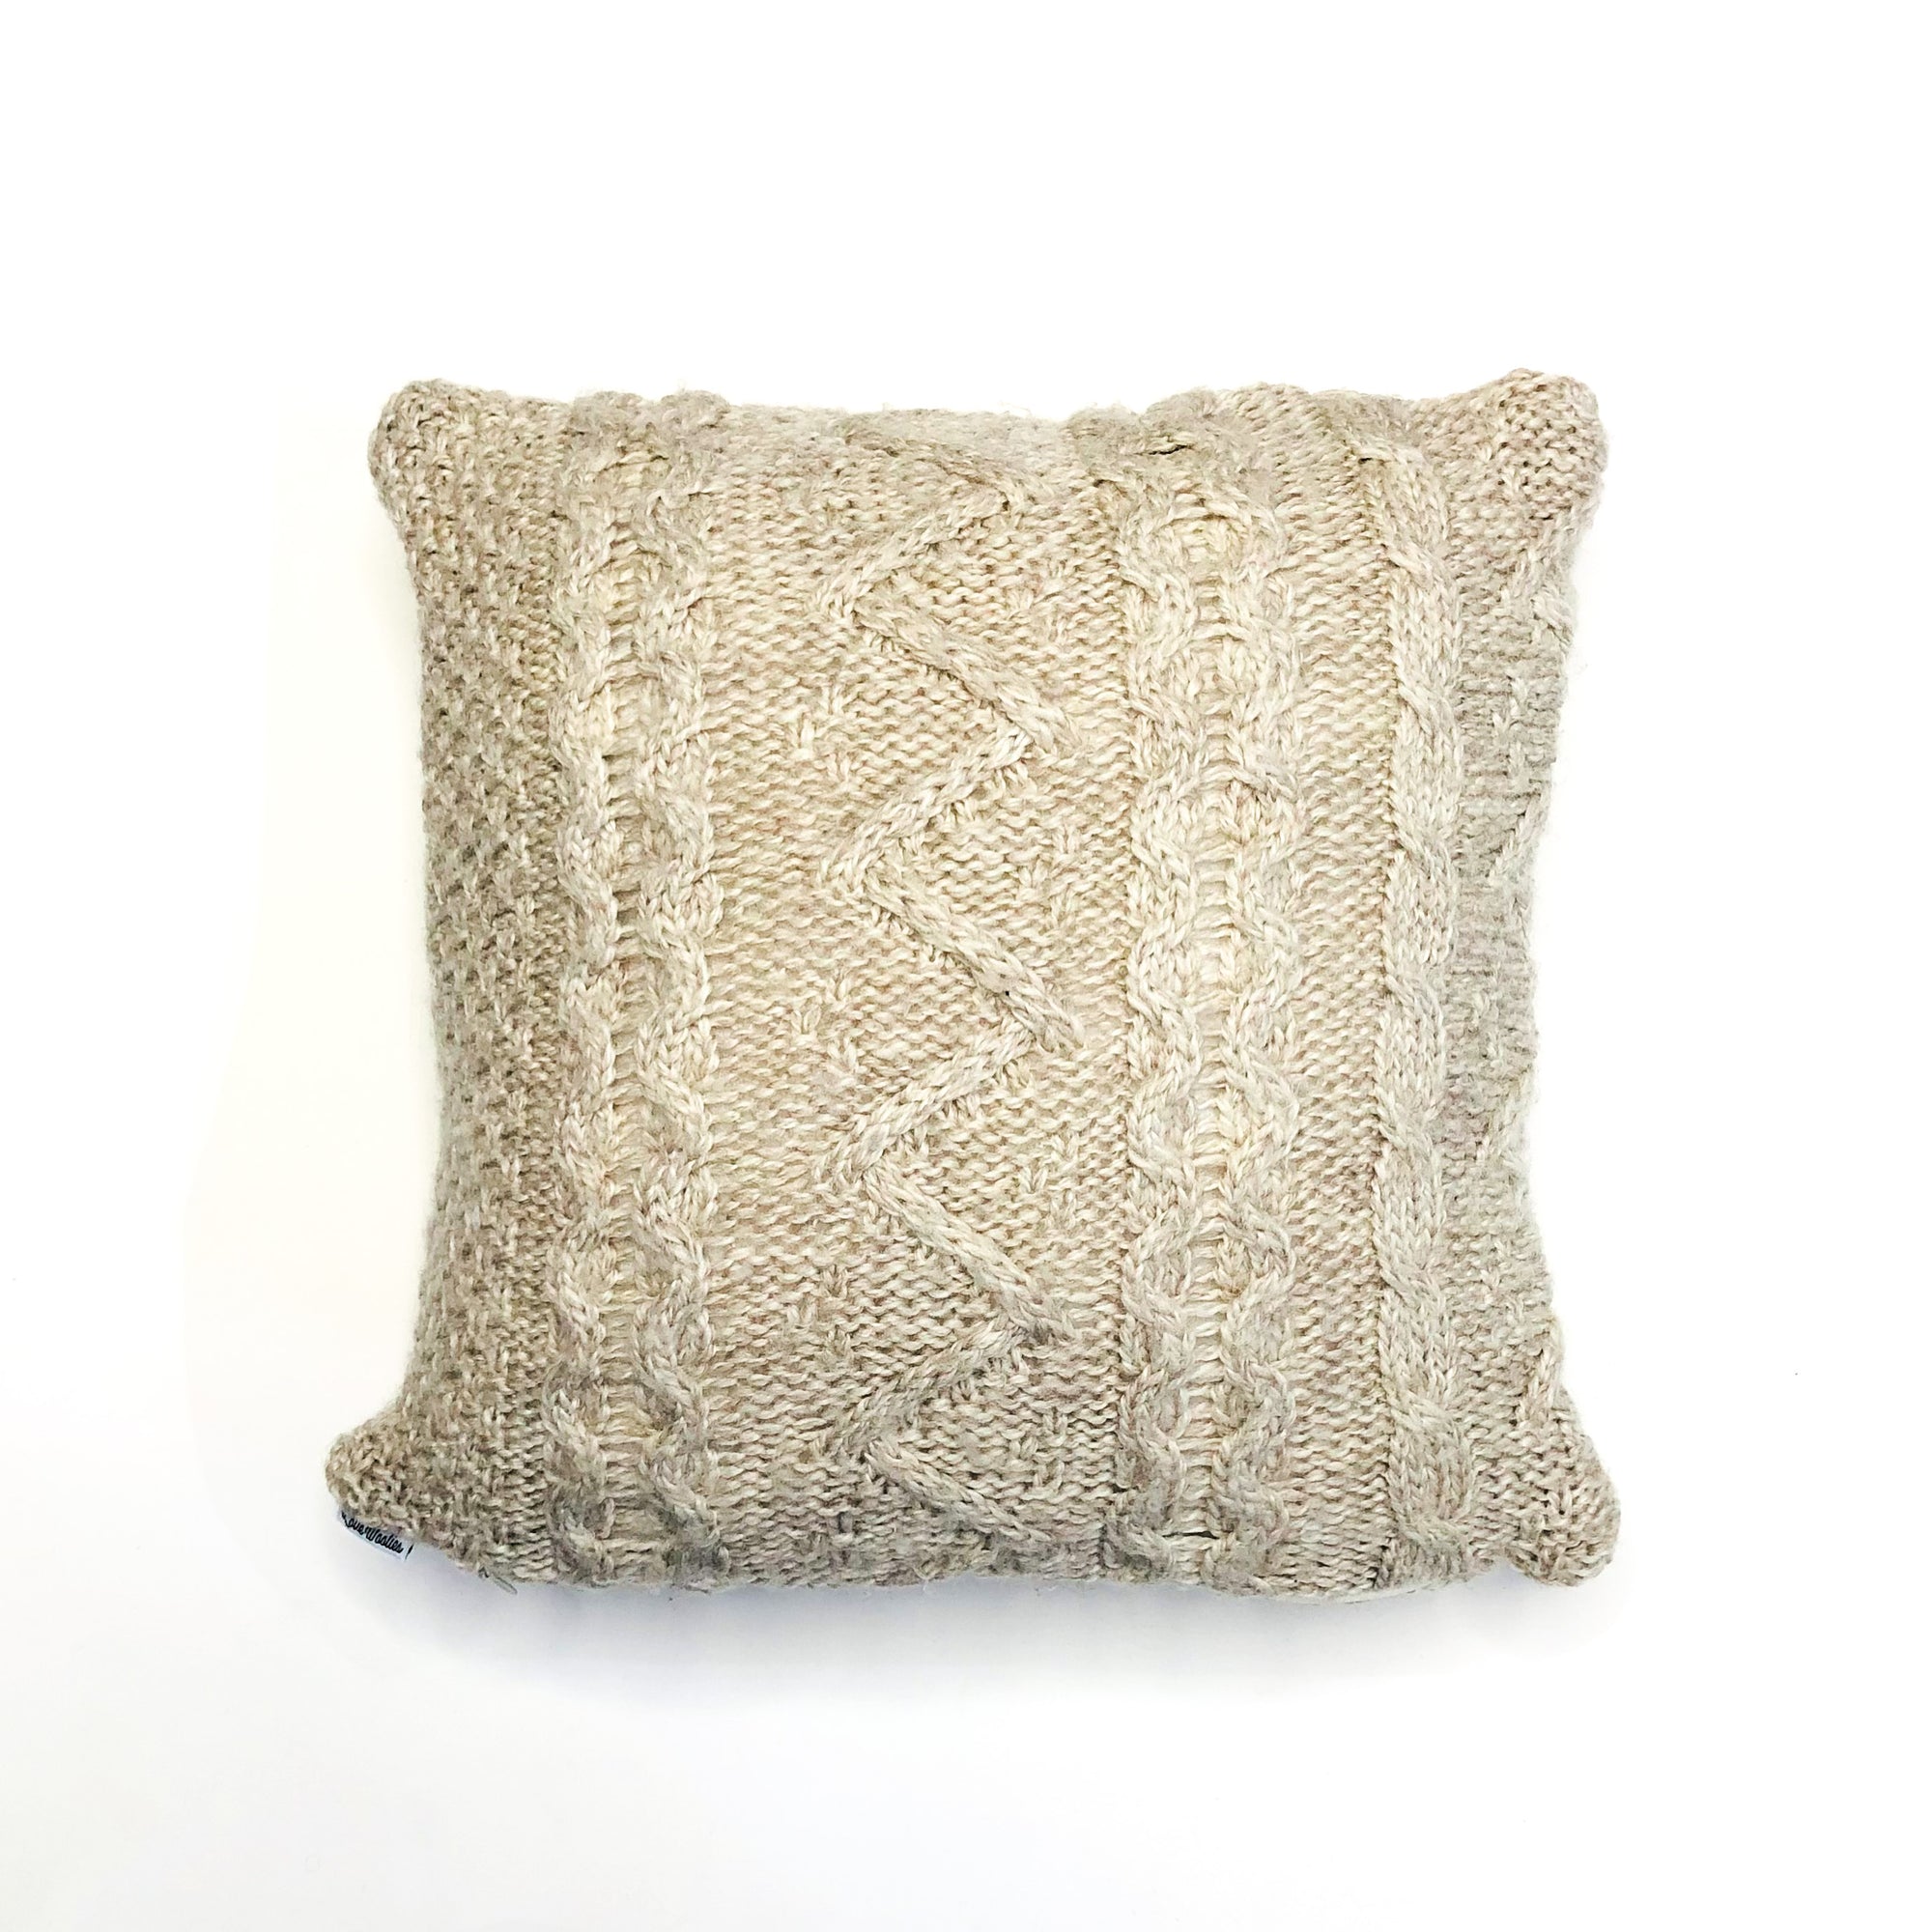 12 x 12 Cable Knit Pillow Cover